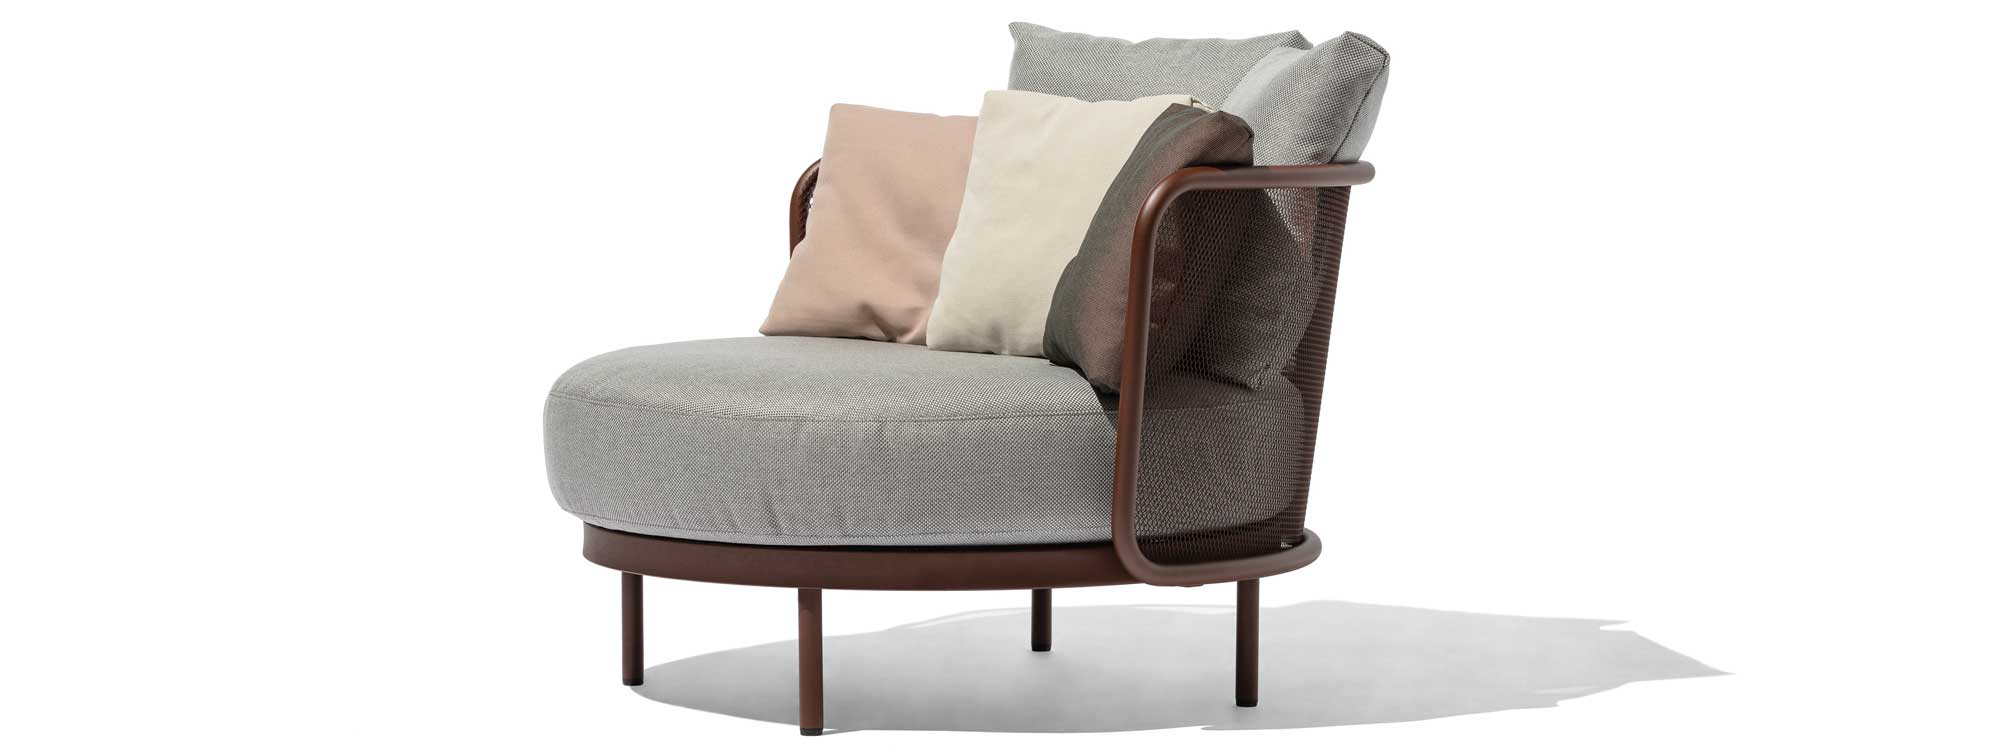 Studio image of Todus Baza garden lounge chair with rust brown colored frame and light grey cushions by Studio Segers